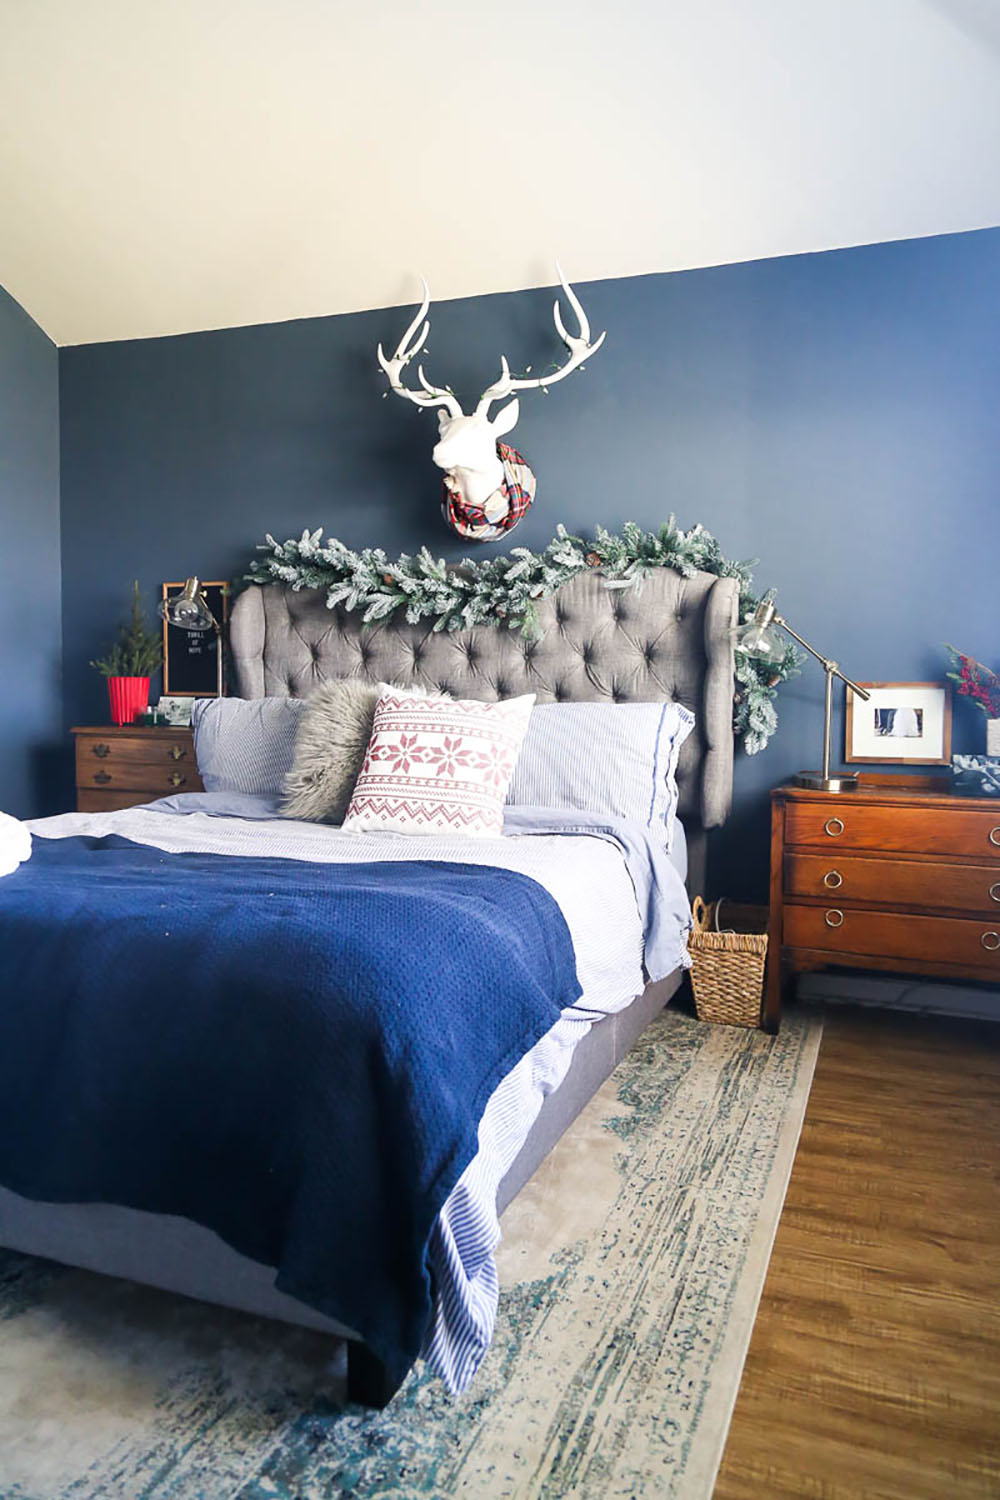 The headboard of a bed is decorated for the holidays with garland.